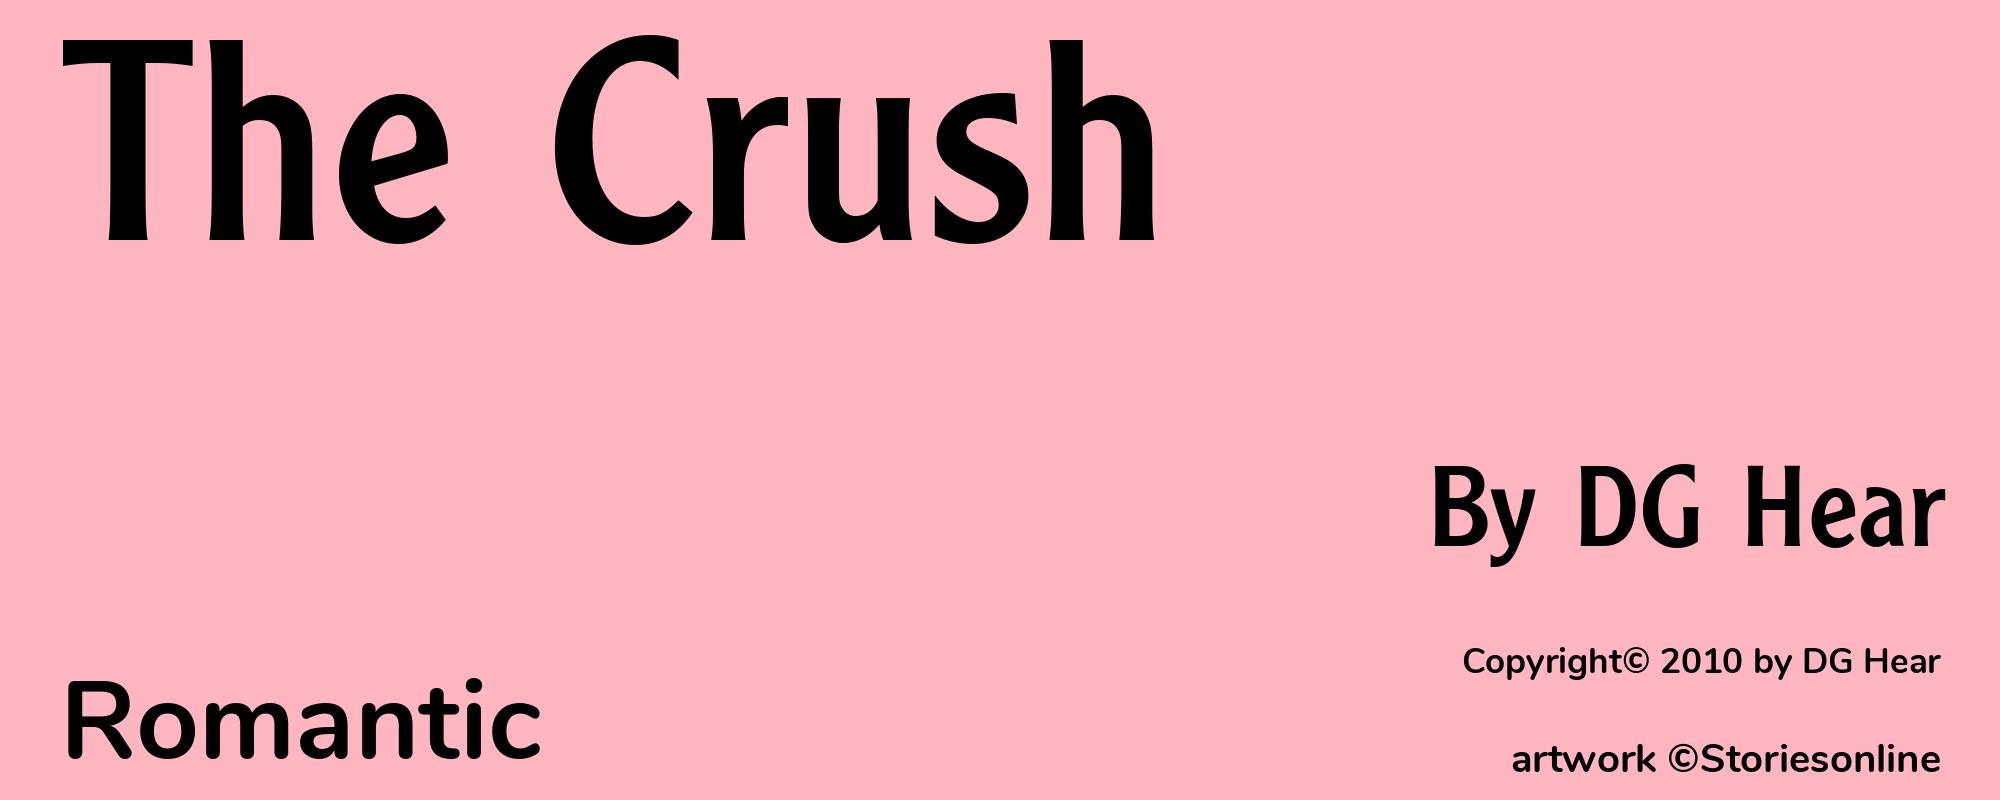 The Crush - Cover